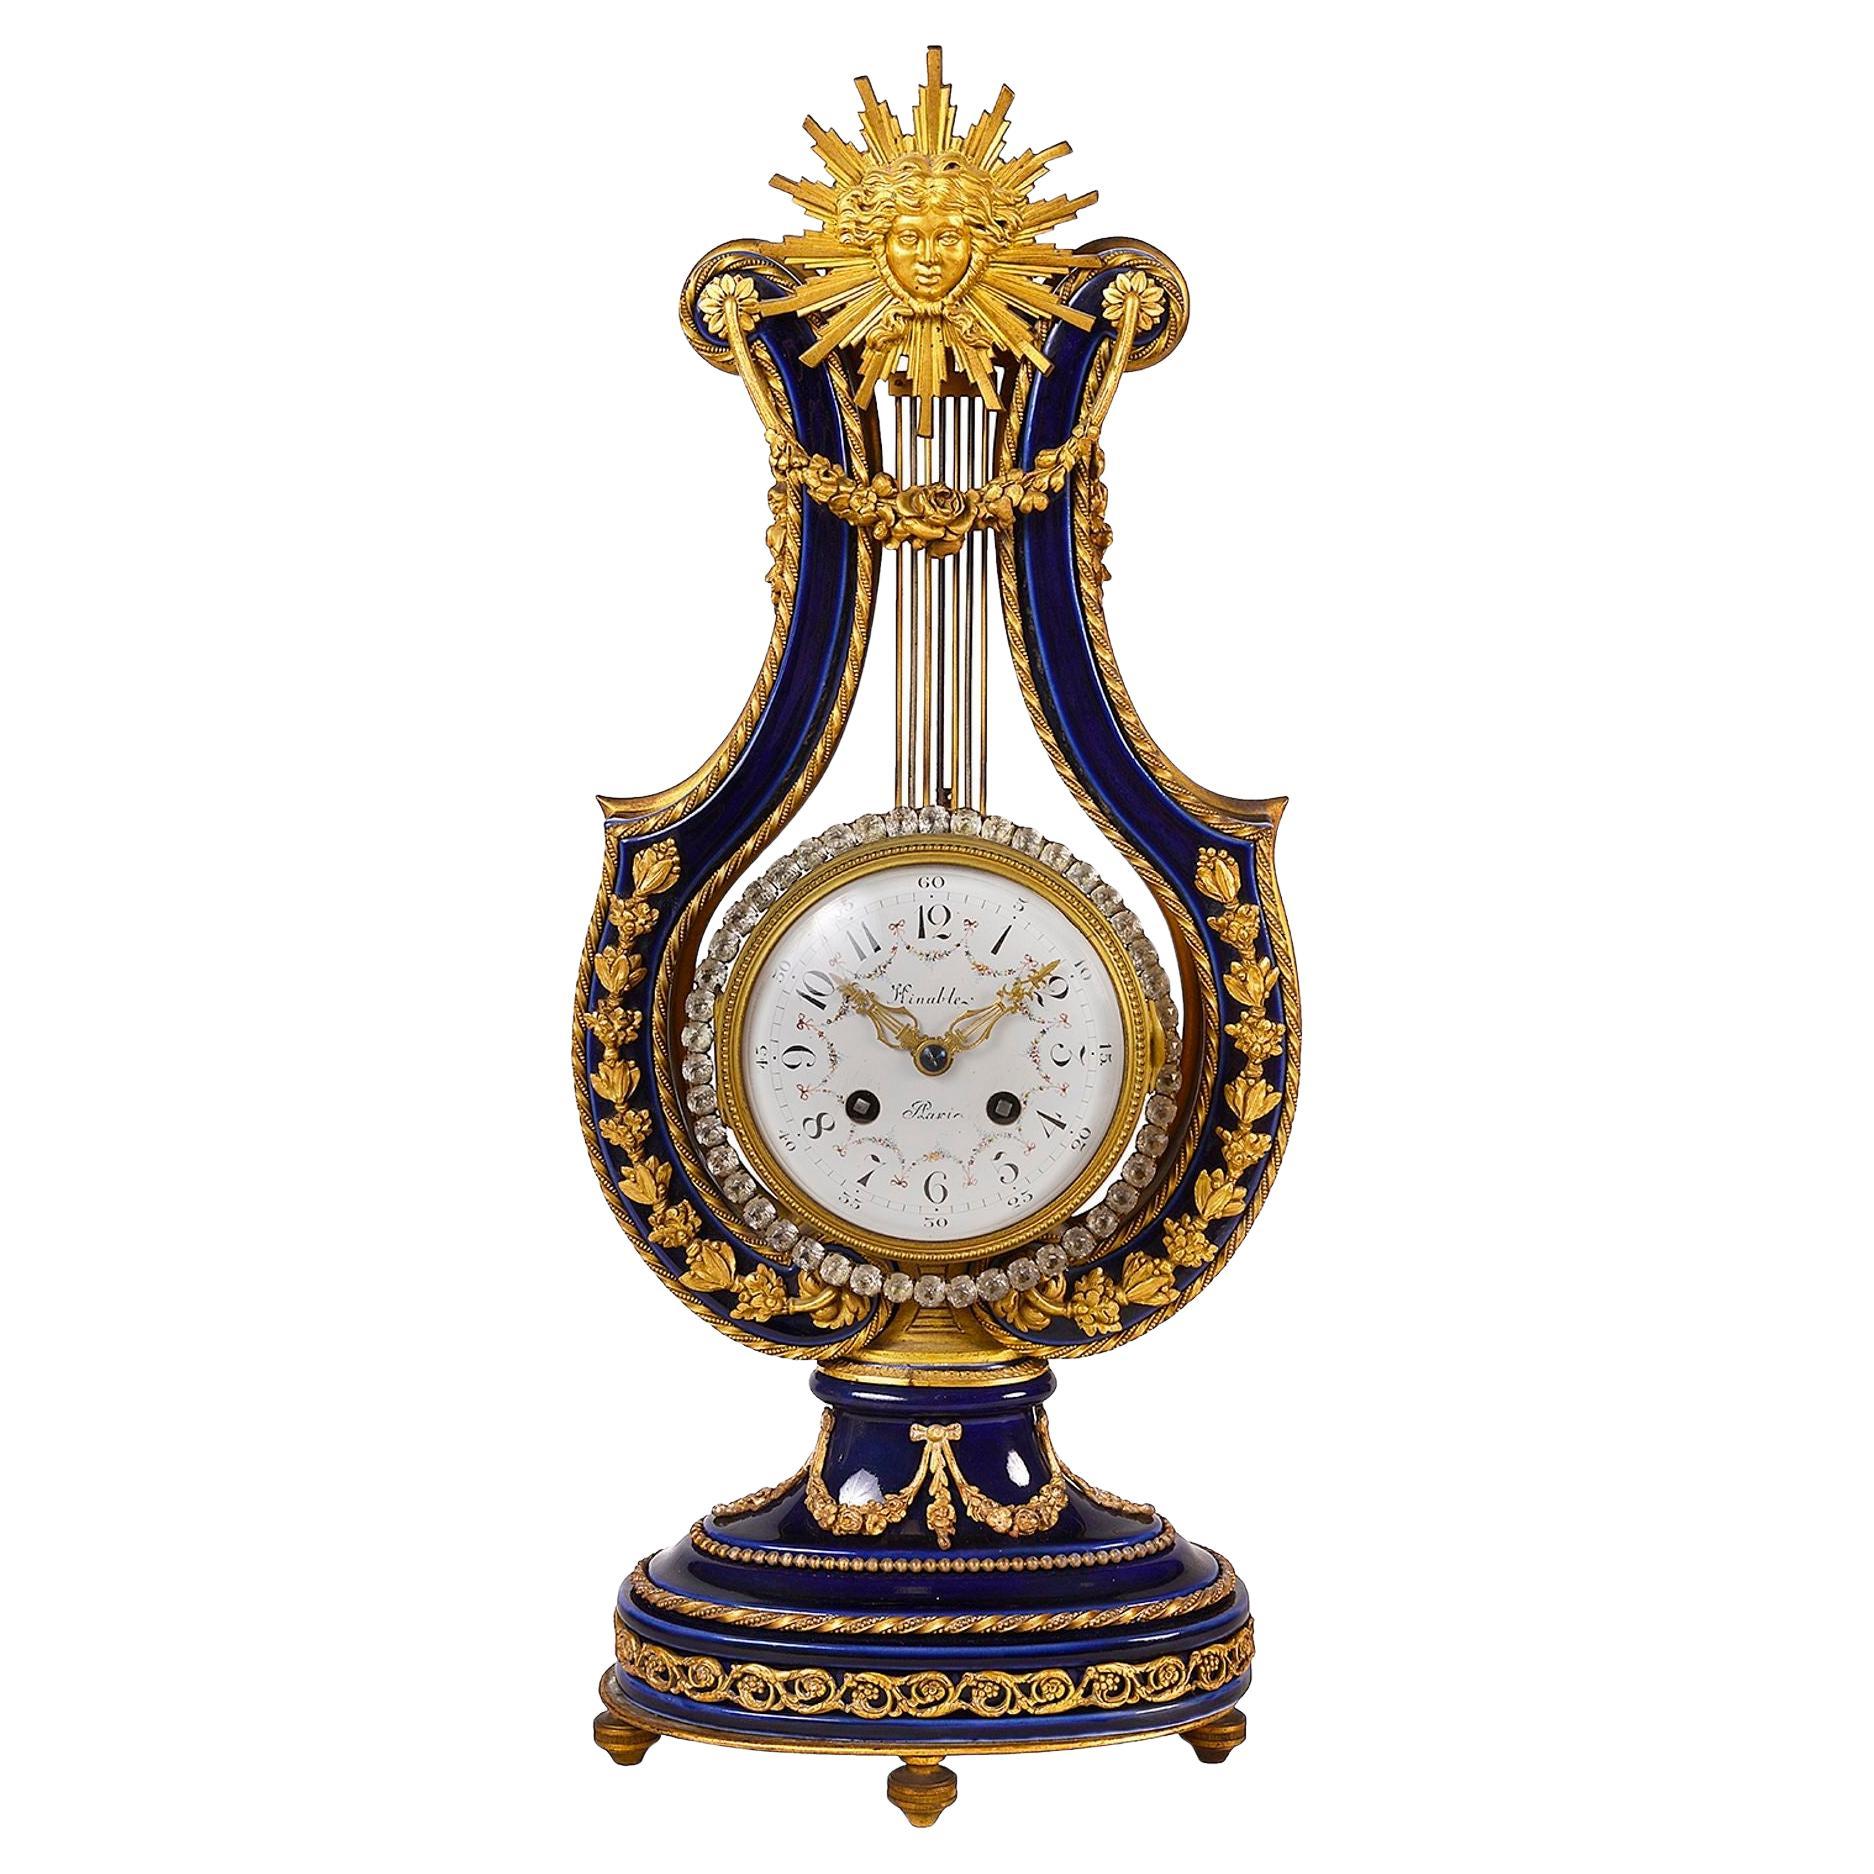 French Sevres Style Porcelain and Ormolu-Mounted Lyre Clock